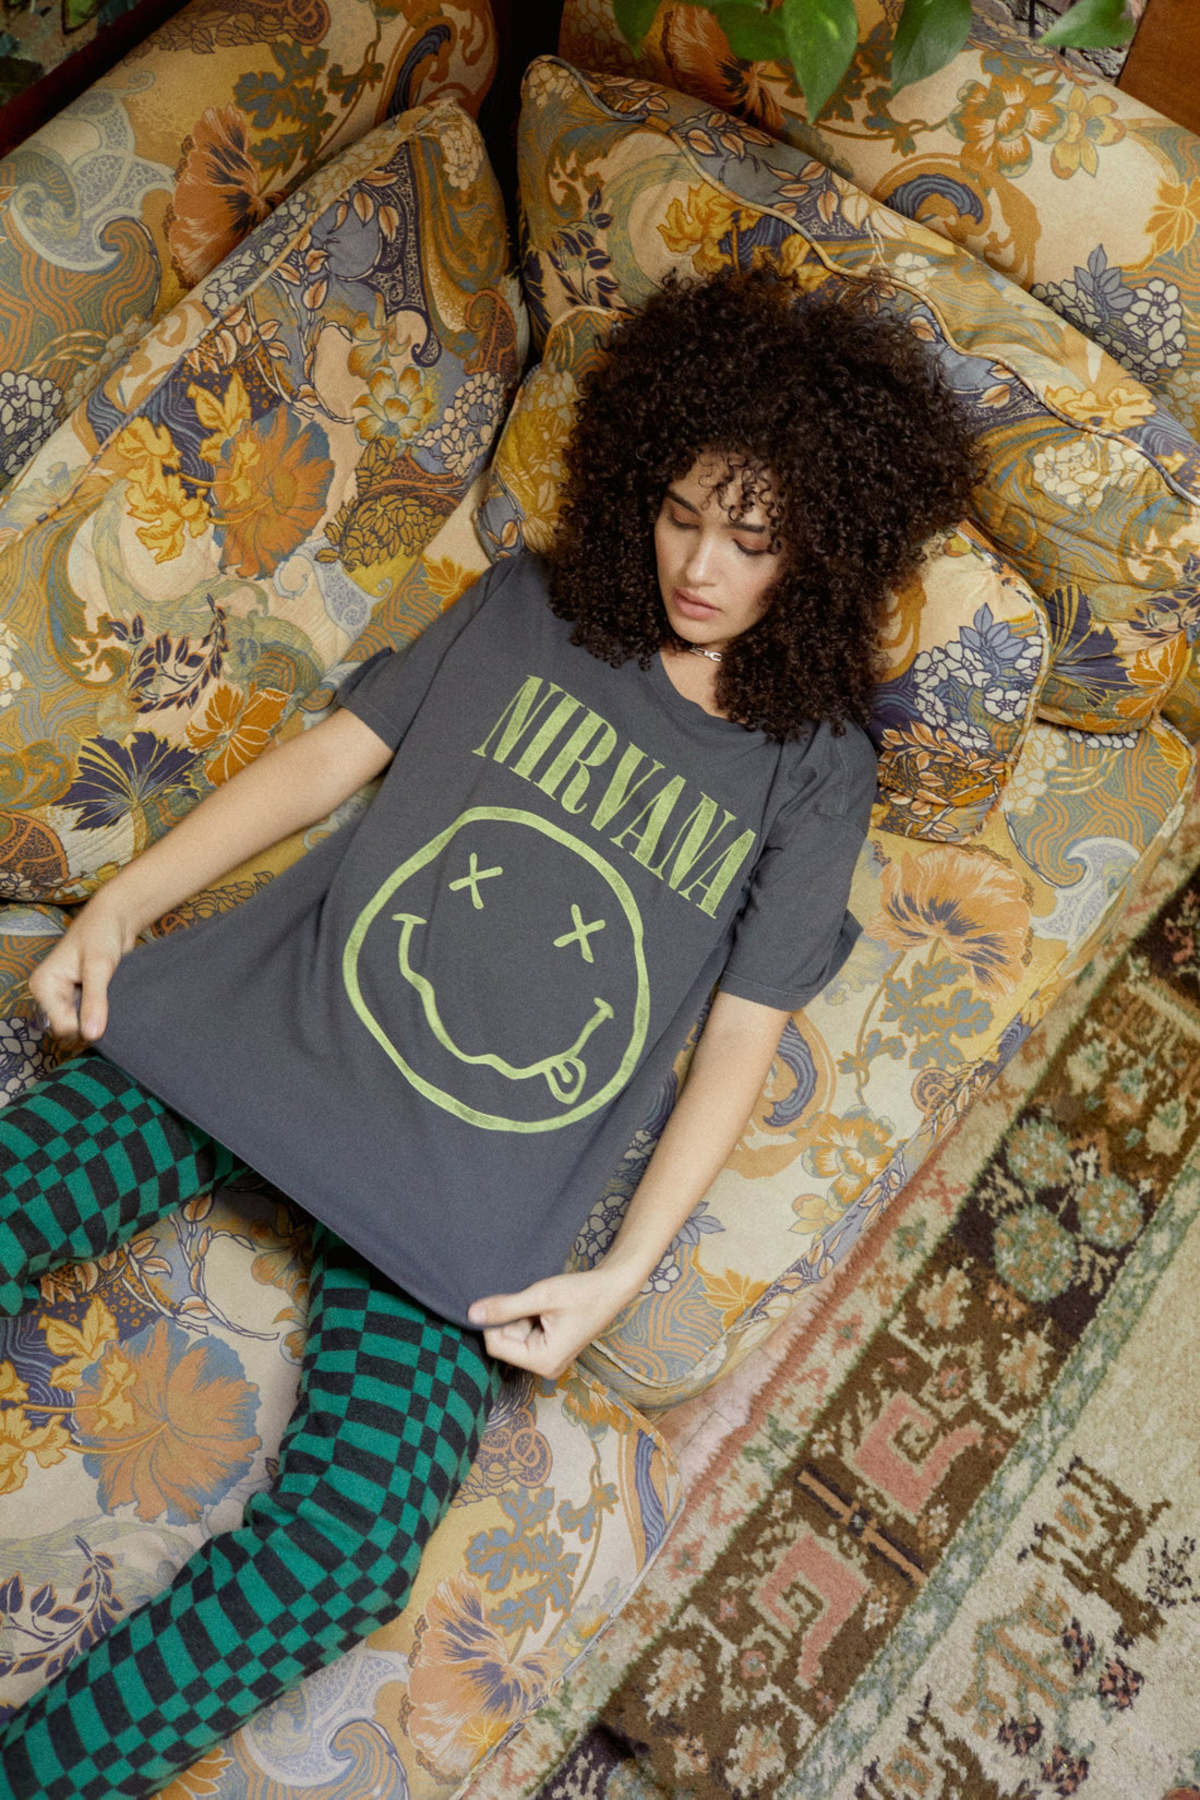 Indulge in Authenticity: Find Genuine Nirvana Merchandise at the Store